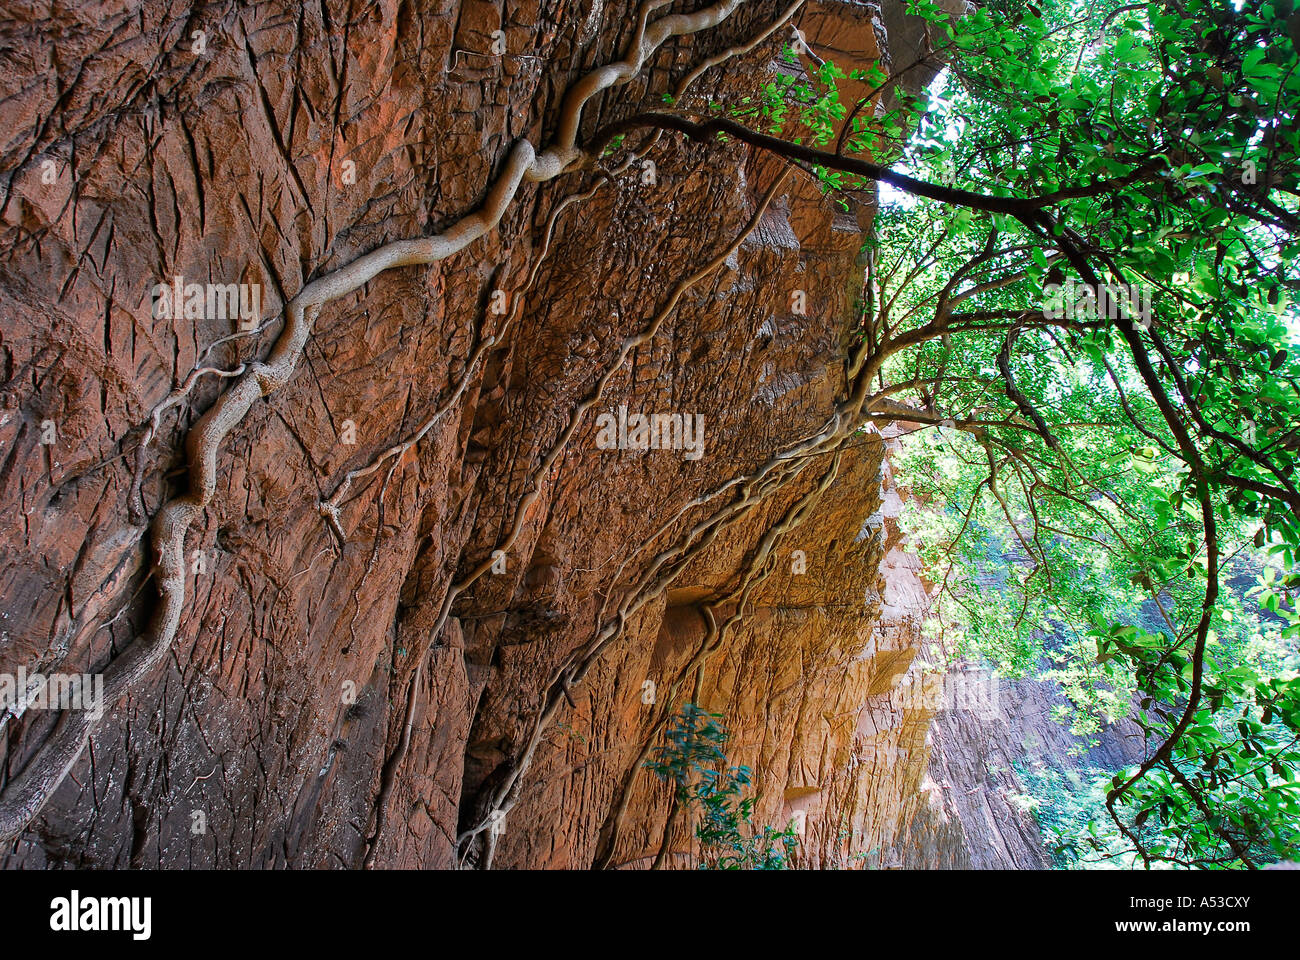 Rock fig growing against cliff face near waterfall, Sabie, Mpumalanga, South Africa Stock Photo